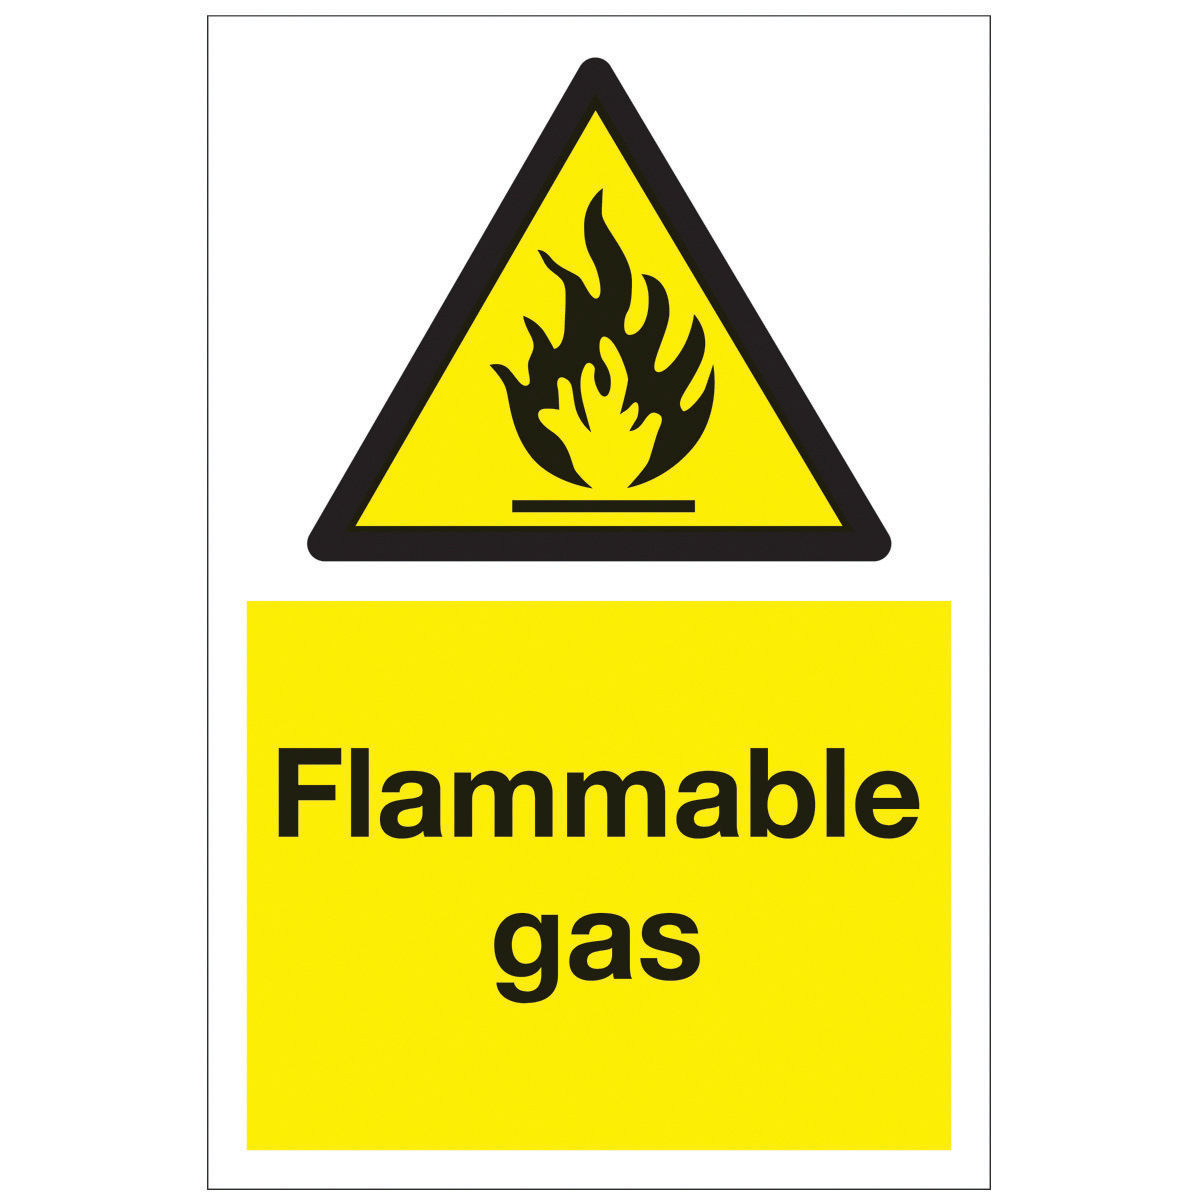 Safety Symbols For Flammable - ClipArt Best